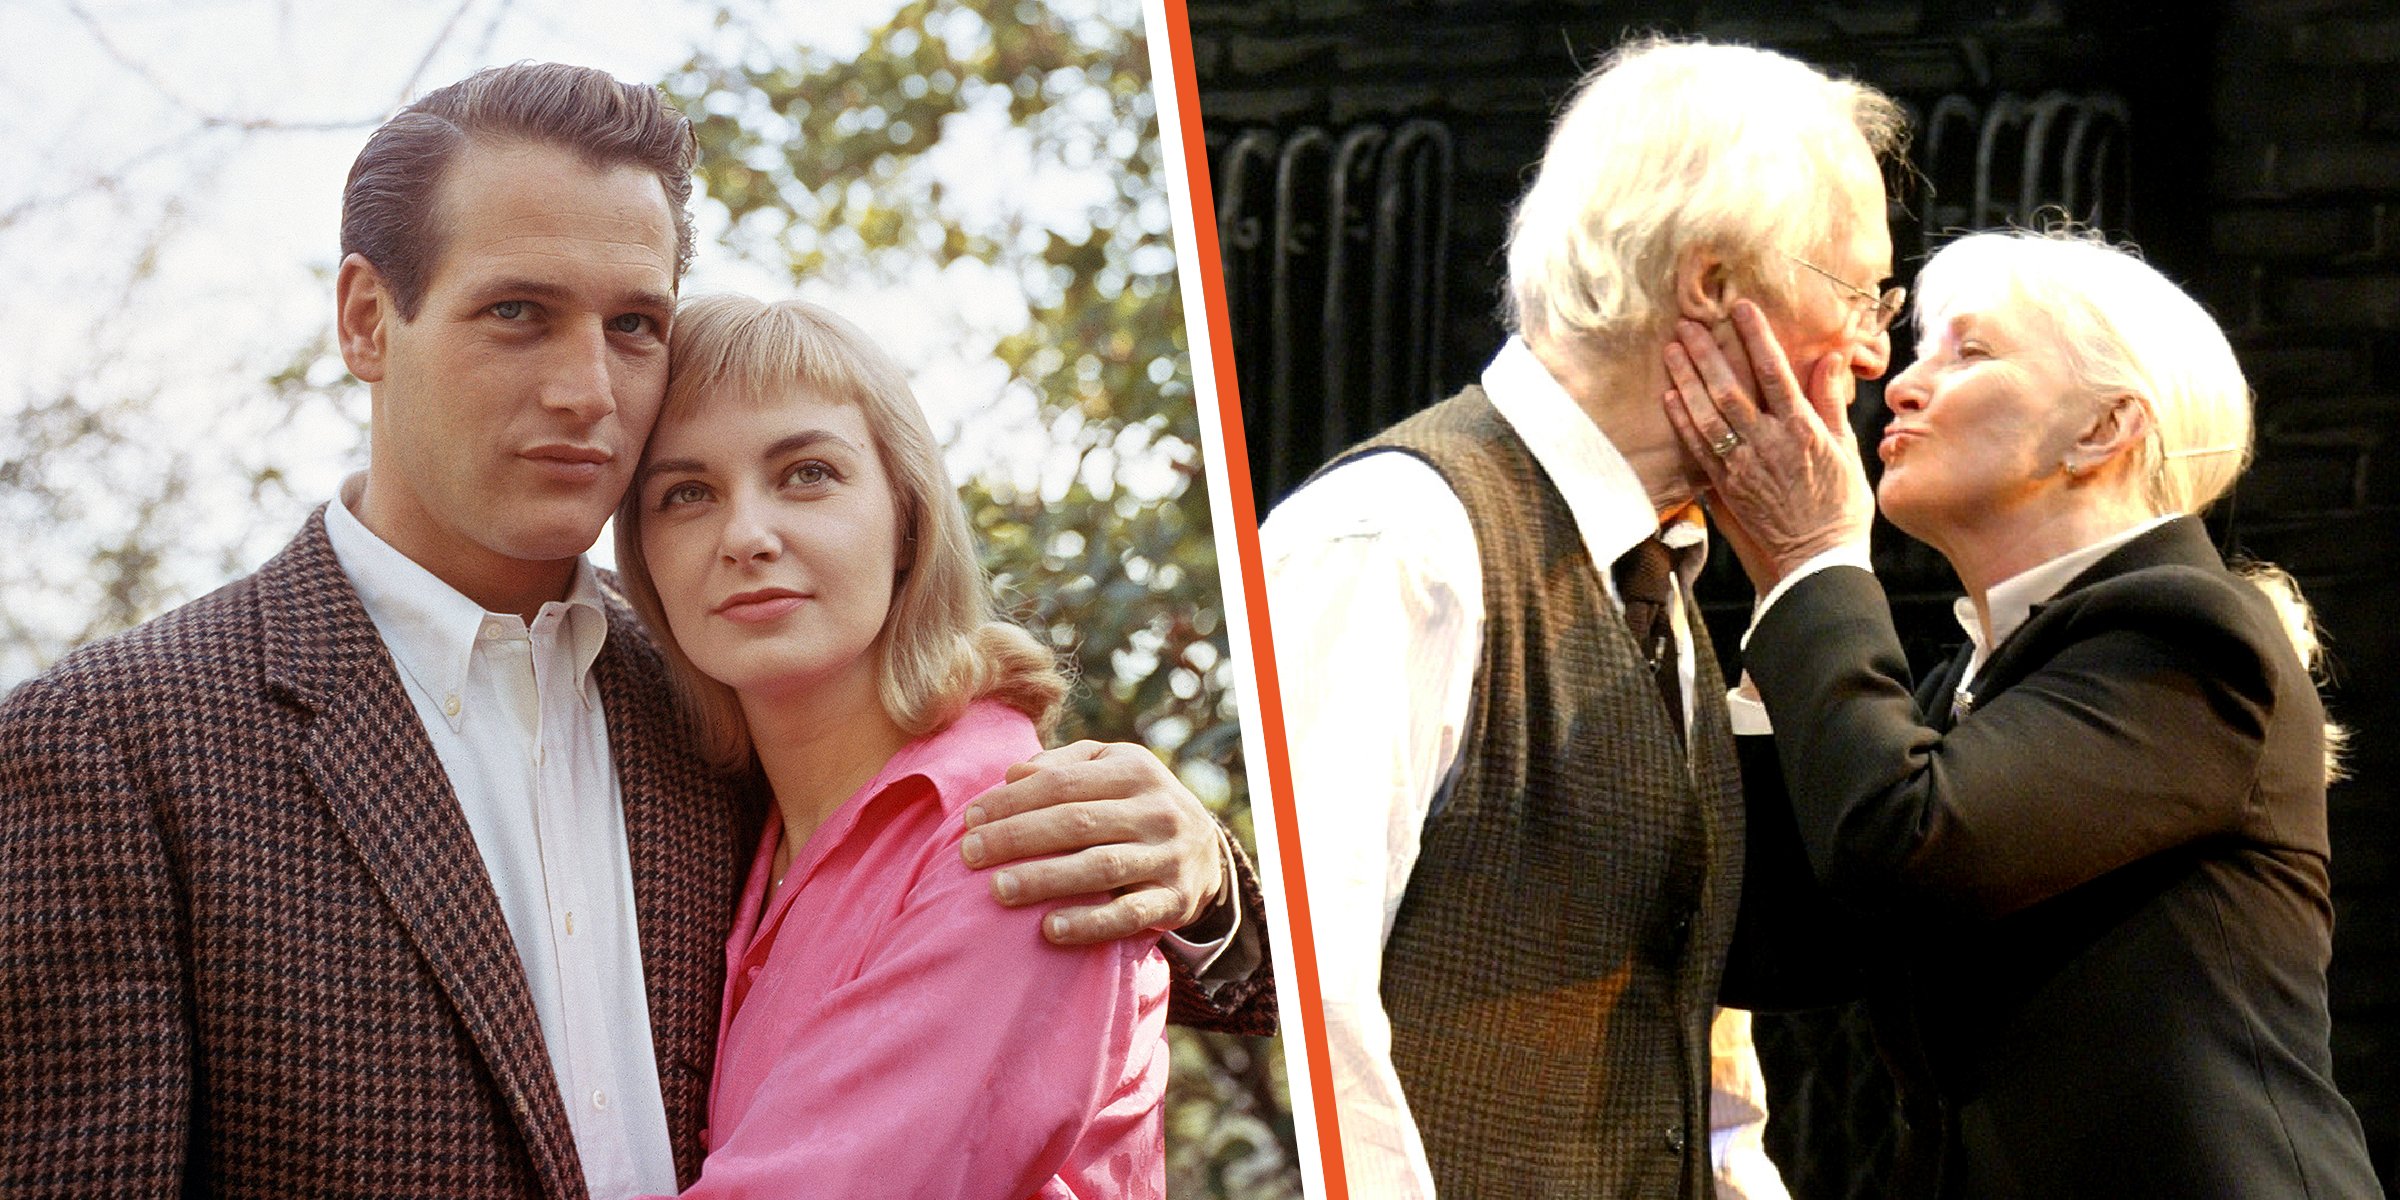 Paul Newman and Joanne Woodward, 1970 | Paul Newman and Joanne Woodward, 2003 | Source: Instagram.com/nellnewman | Getty Images